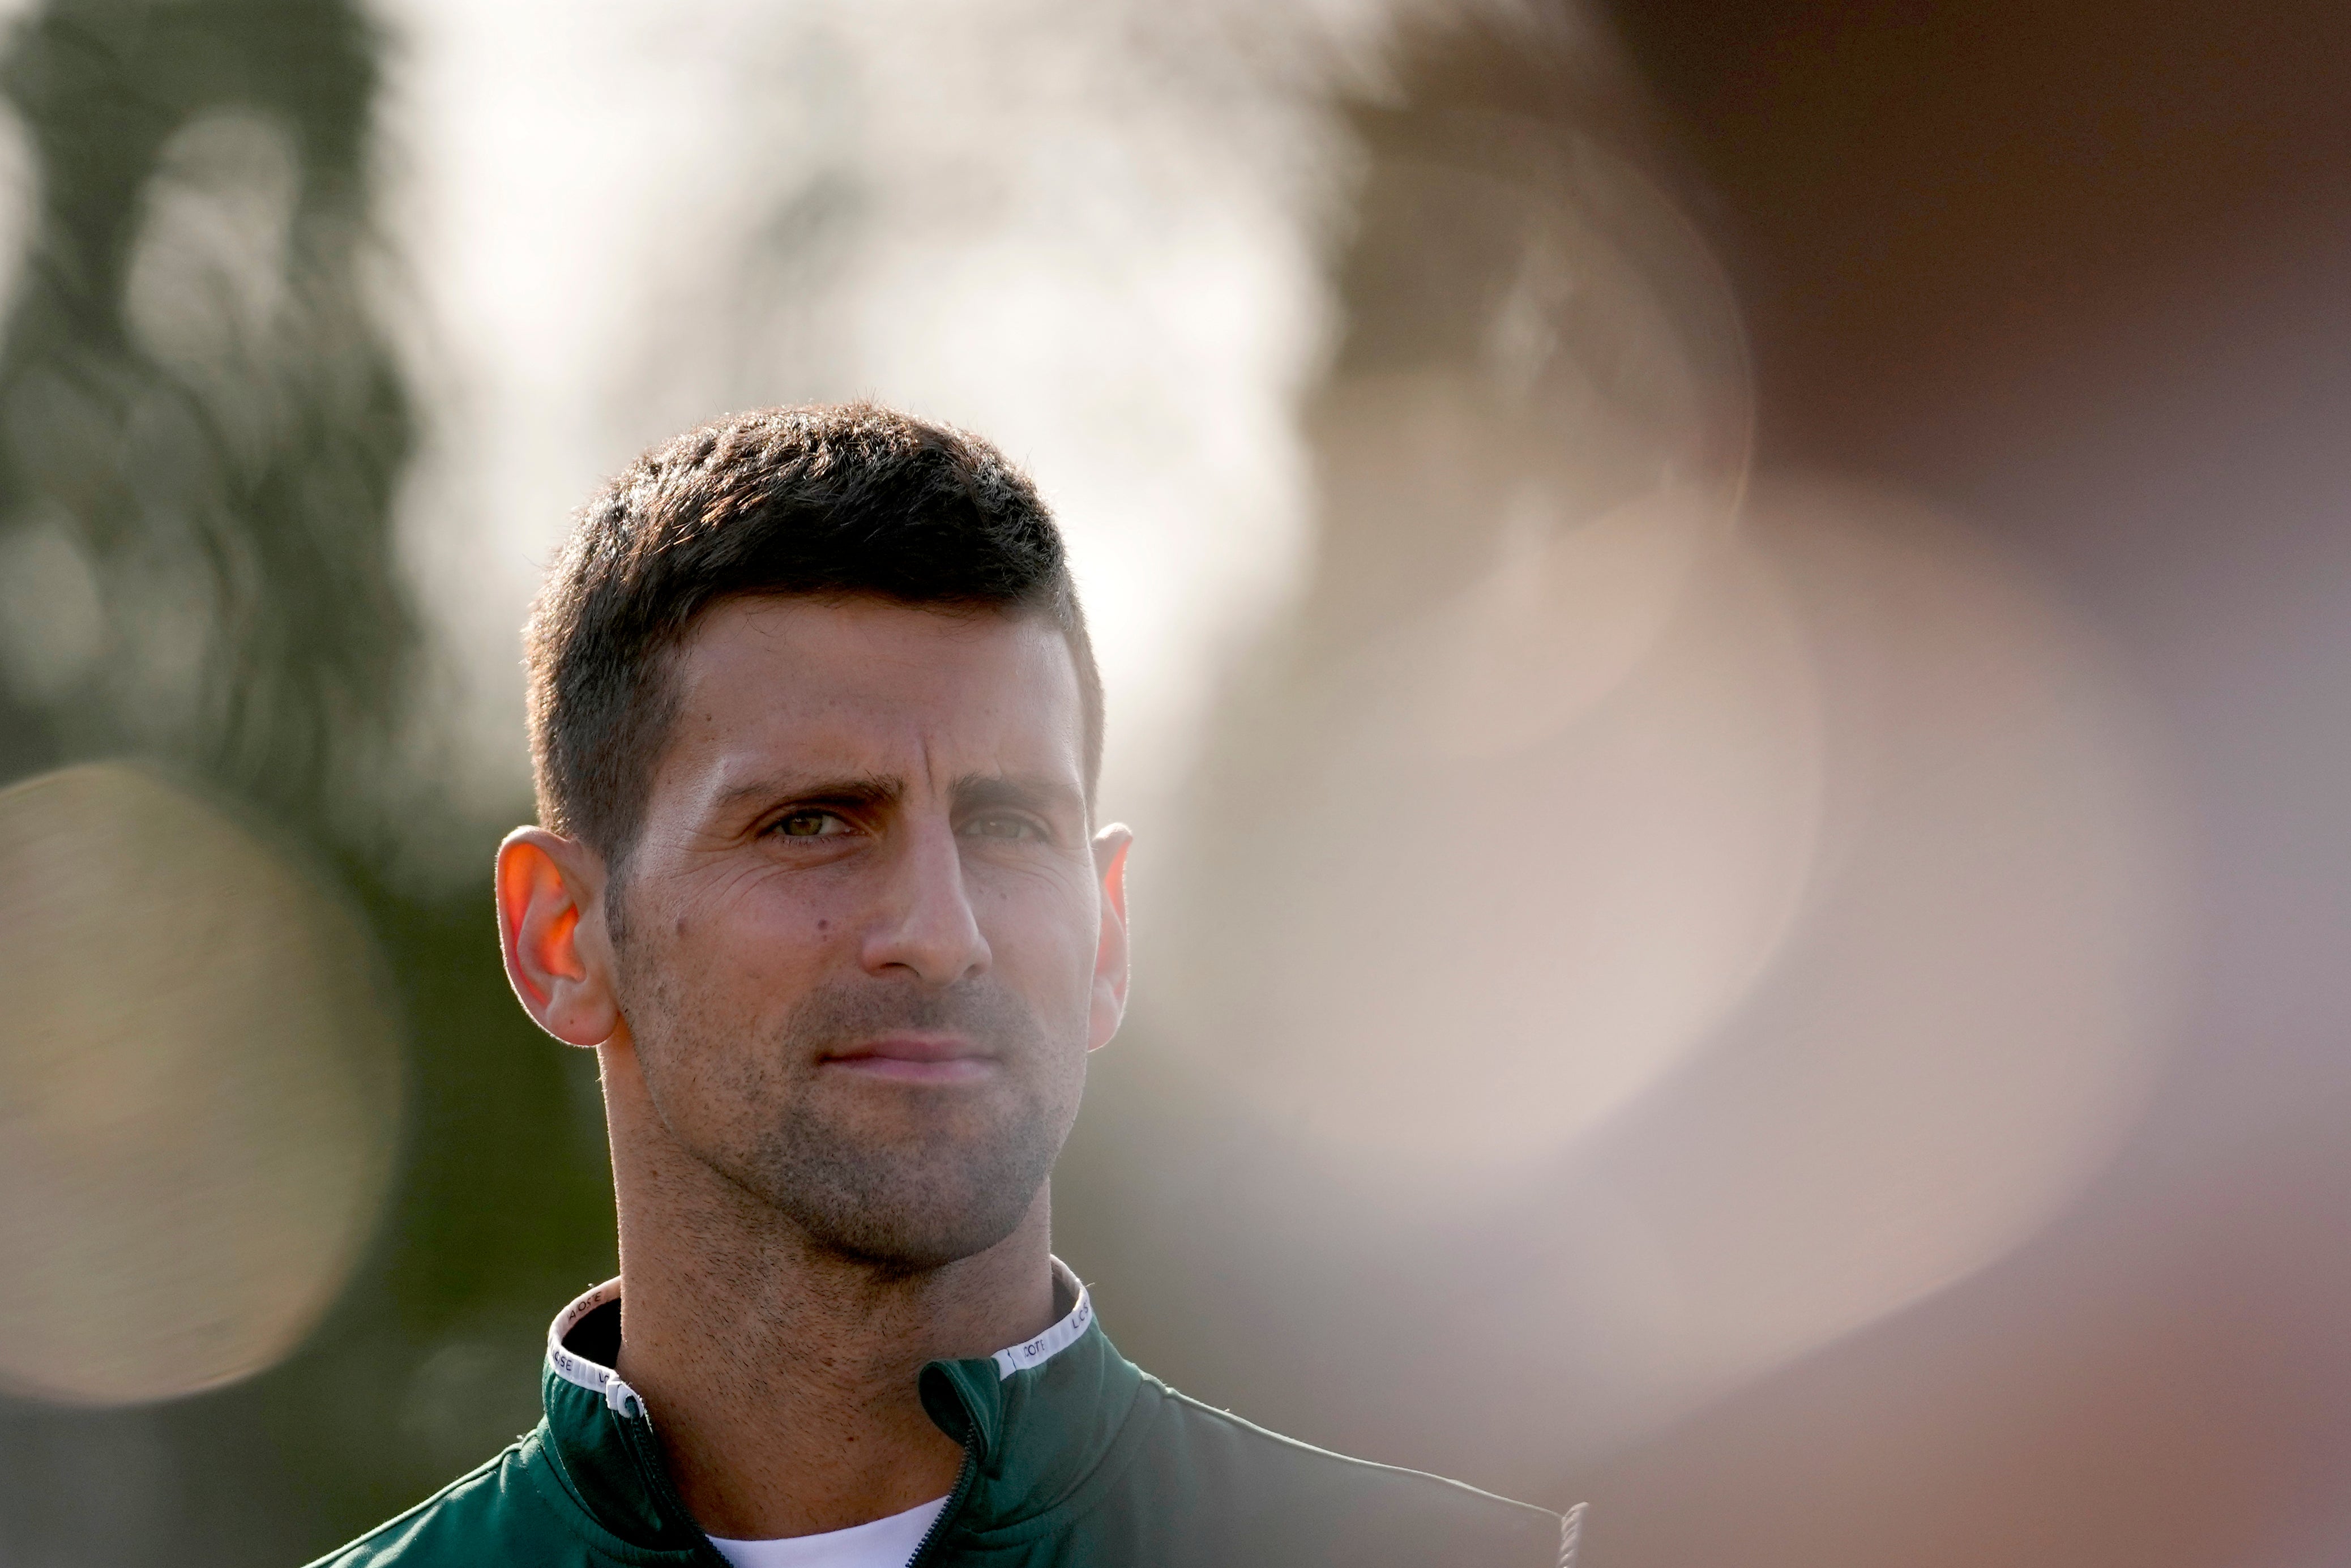 Novak Djokovic is hoping to play over the coming weeks